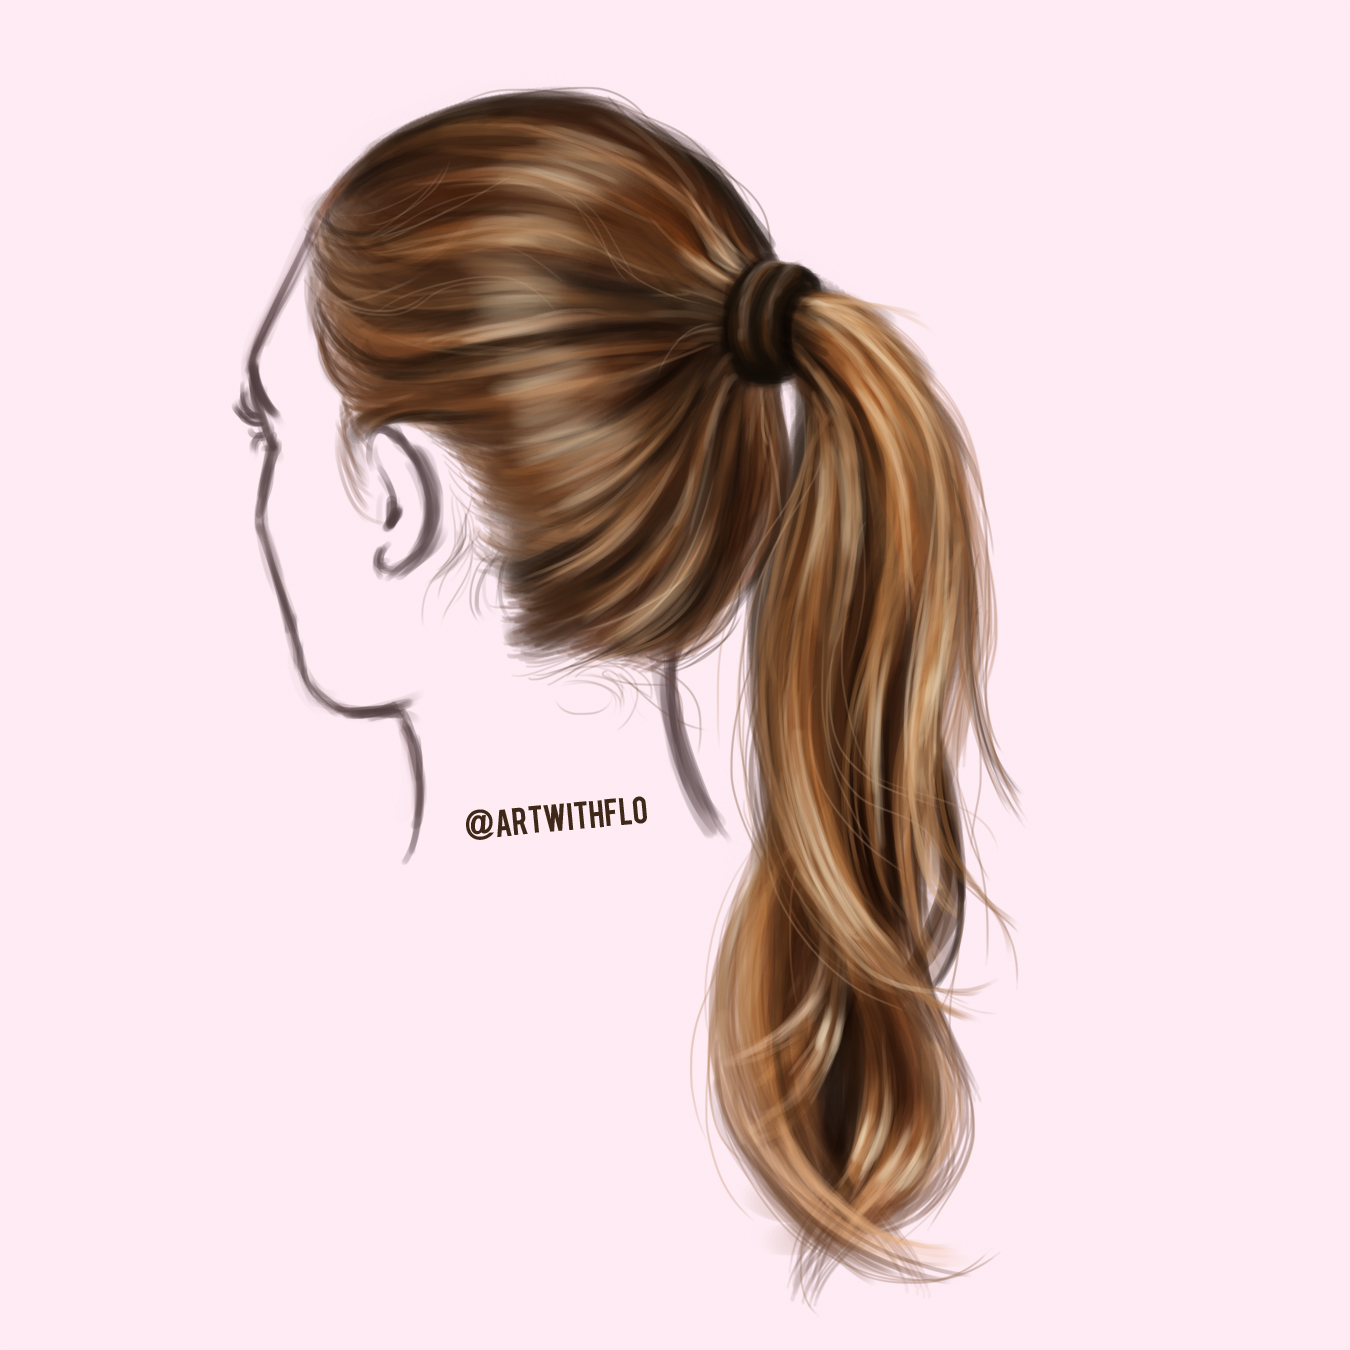 How To Draw A Ponytail From The Back Use the tail comb to style your